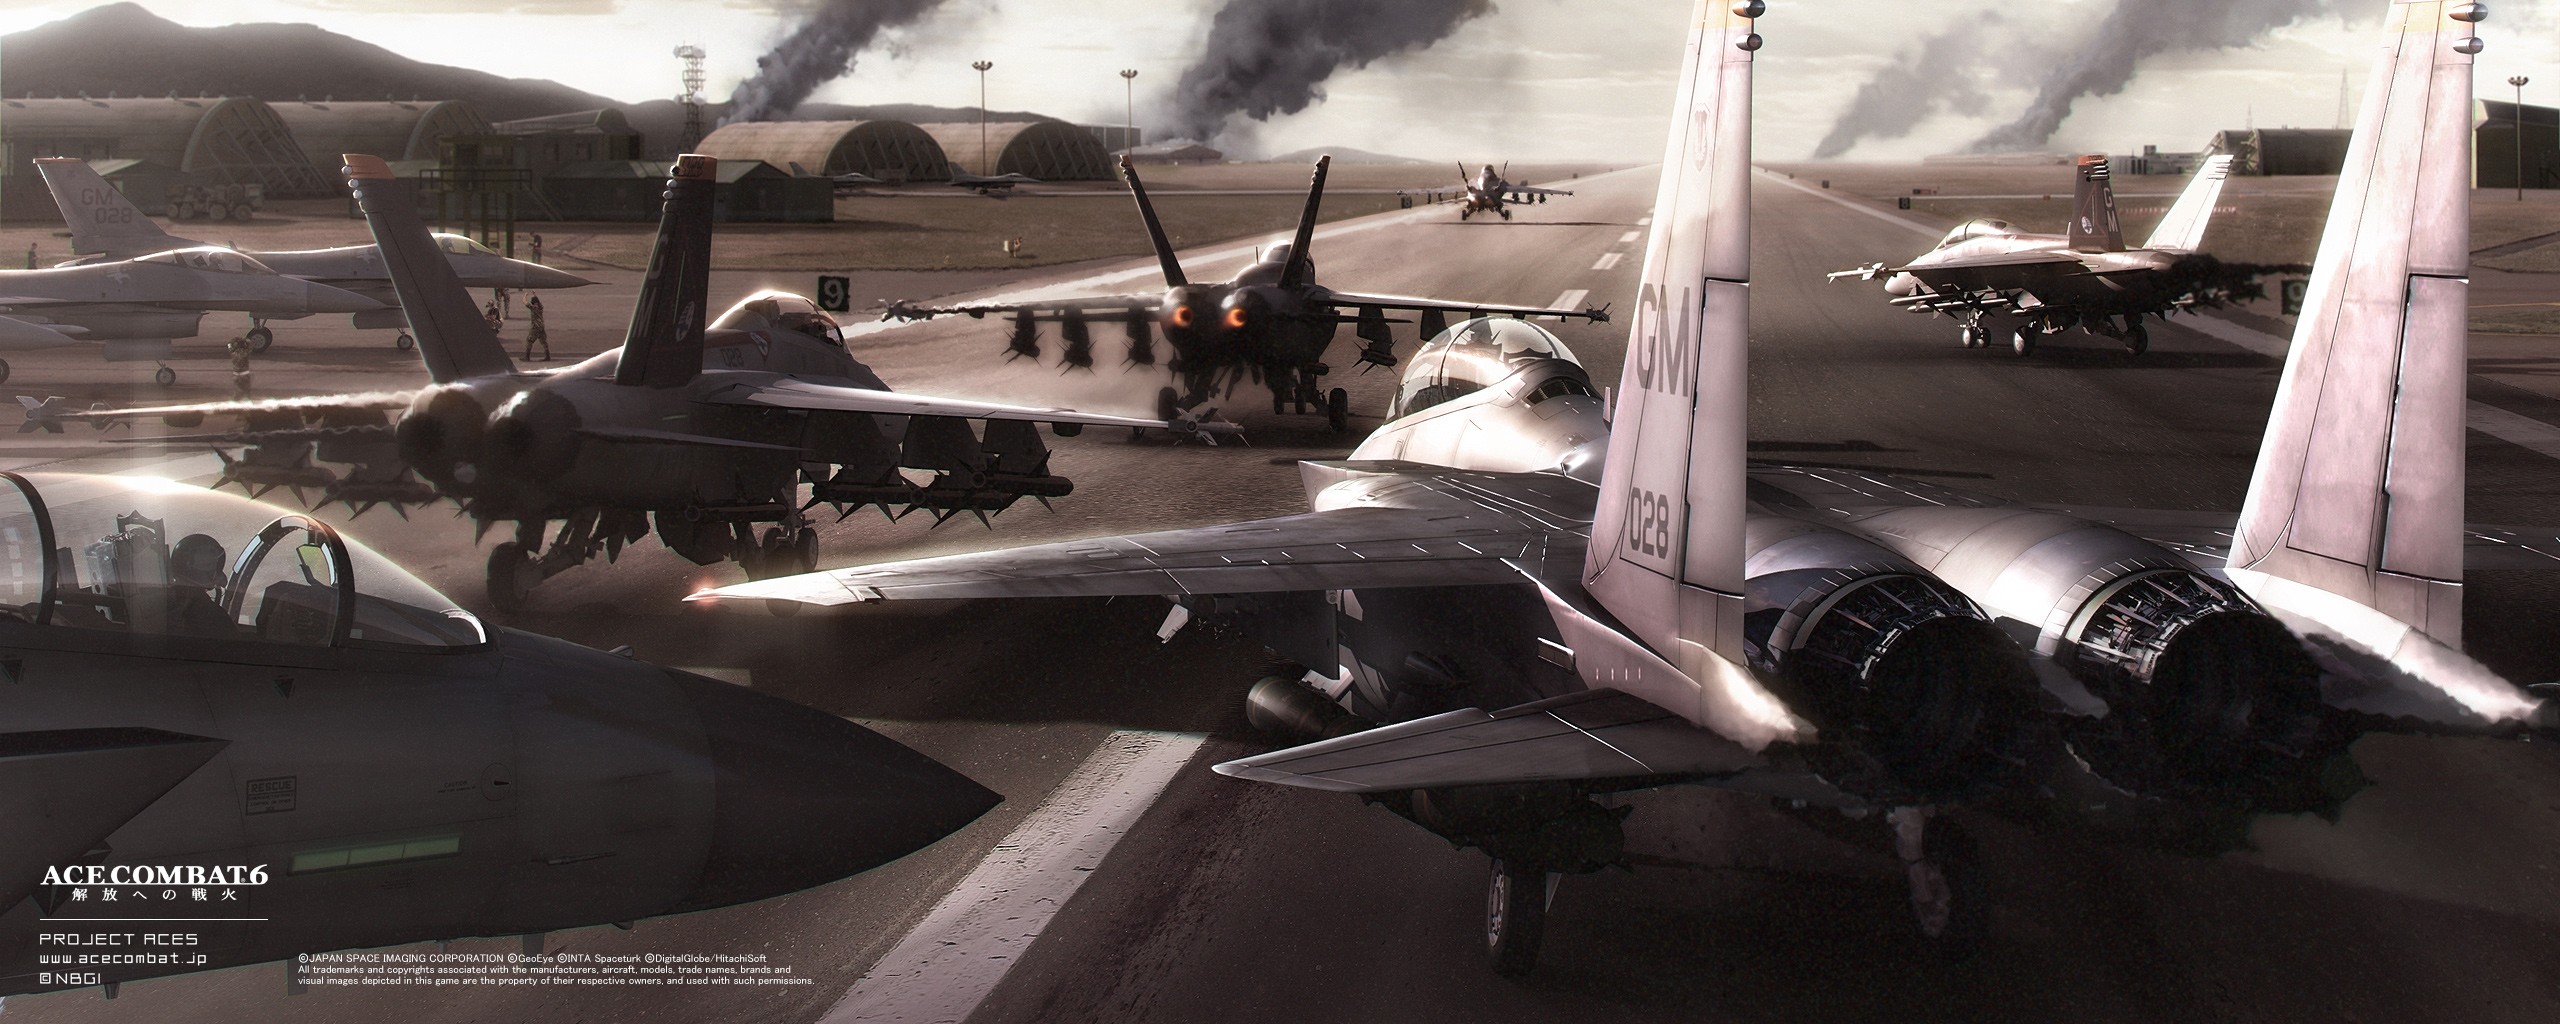 General 2560x1024 Ace Combat 6: Fires of Liberation video games aircraft F-15 Eagle McDonnell Douglas F/A-18 Hornet General Dynamics F-16 Fighting Falcon runway military aircraft vehicle military vehicle video game art smoke jet fighter airplane